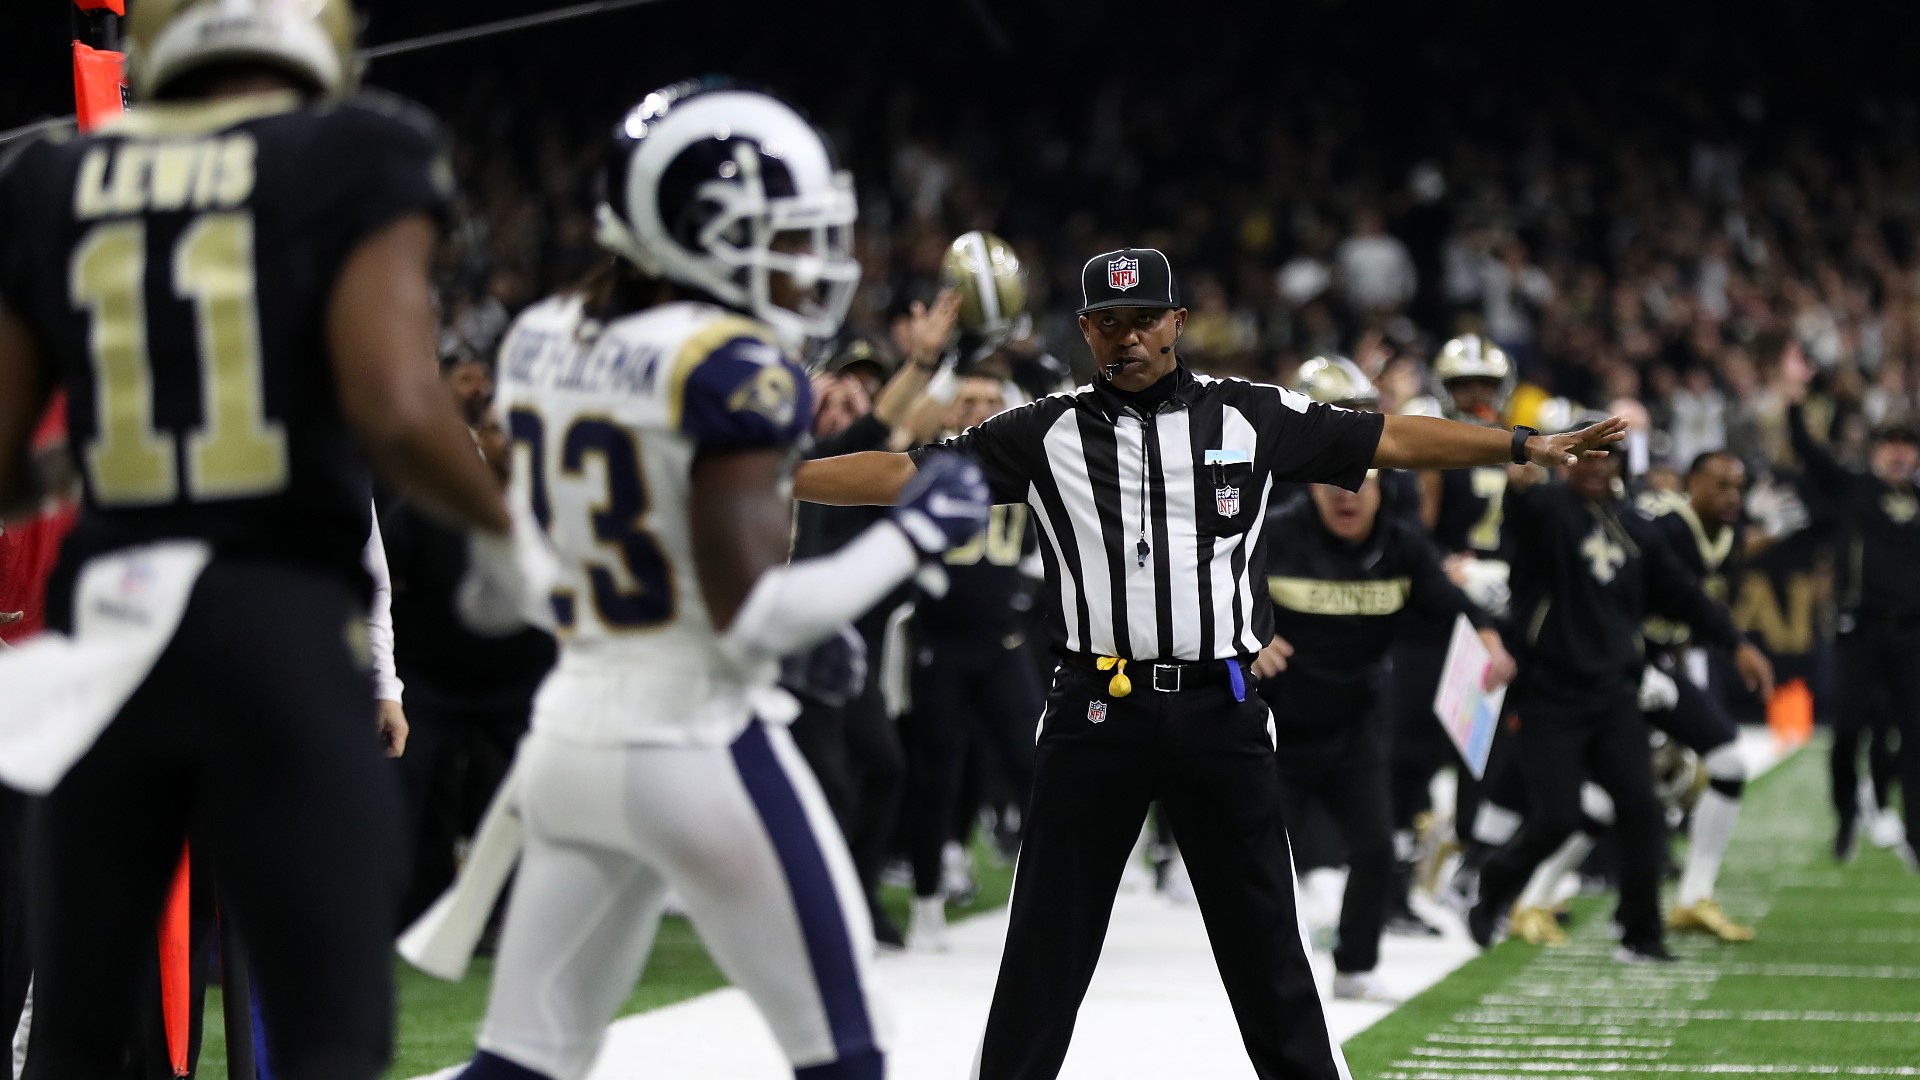 WWL-TV legal analyst Chick Foret talks about the lawsuit against the NFL for the no-call in the NFC Championship.